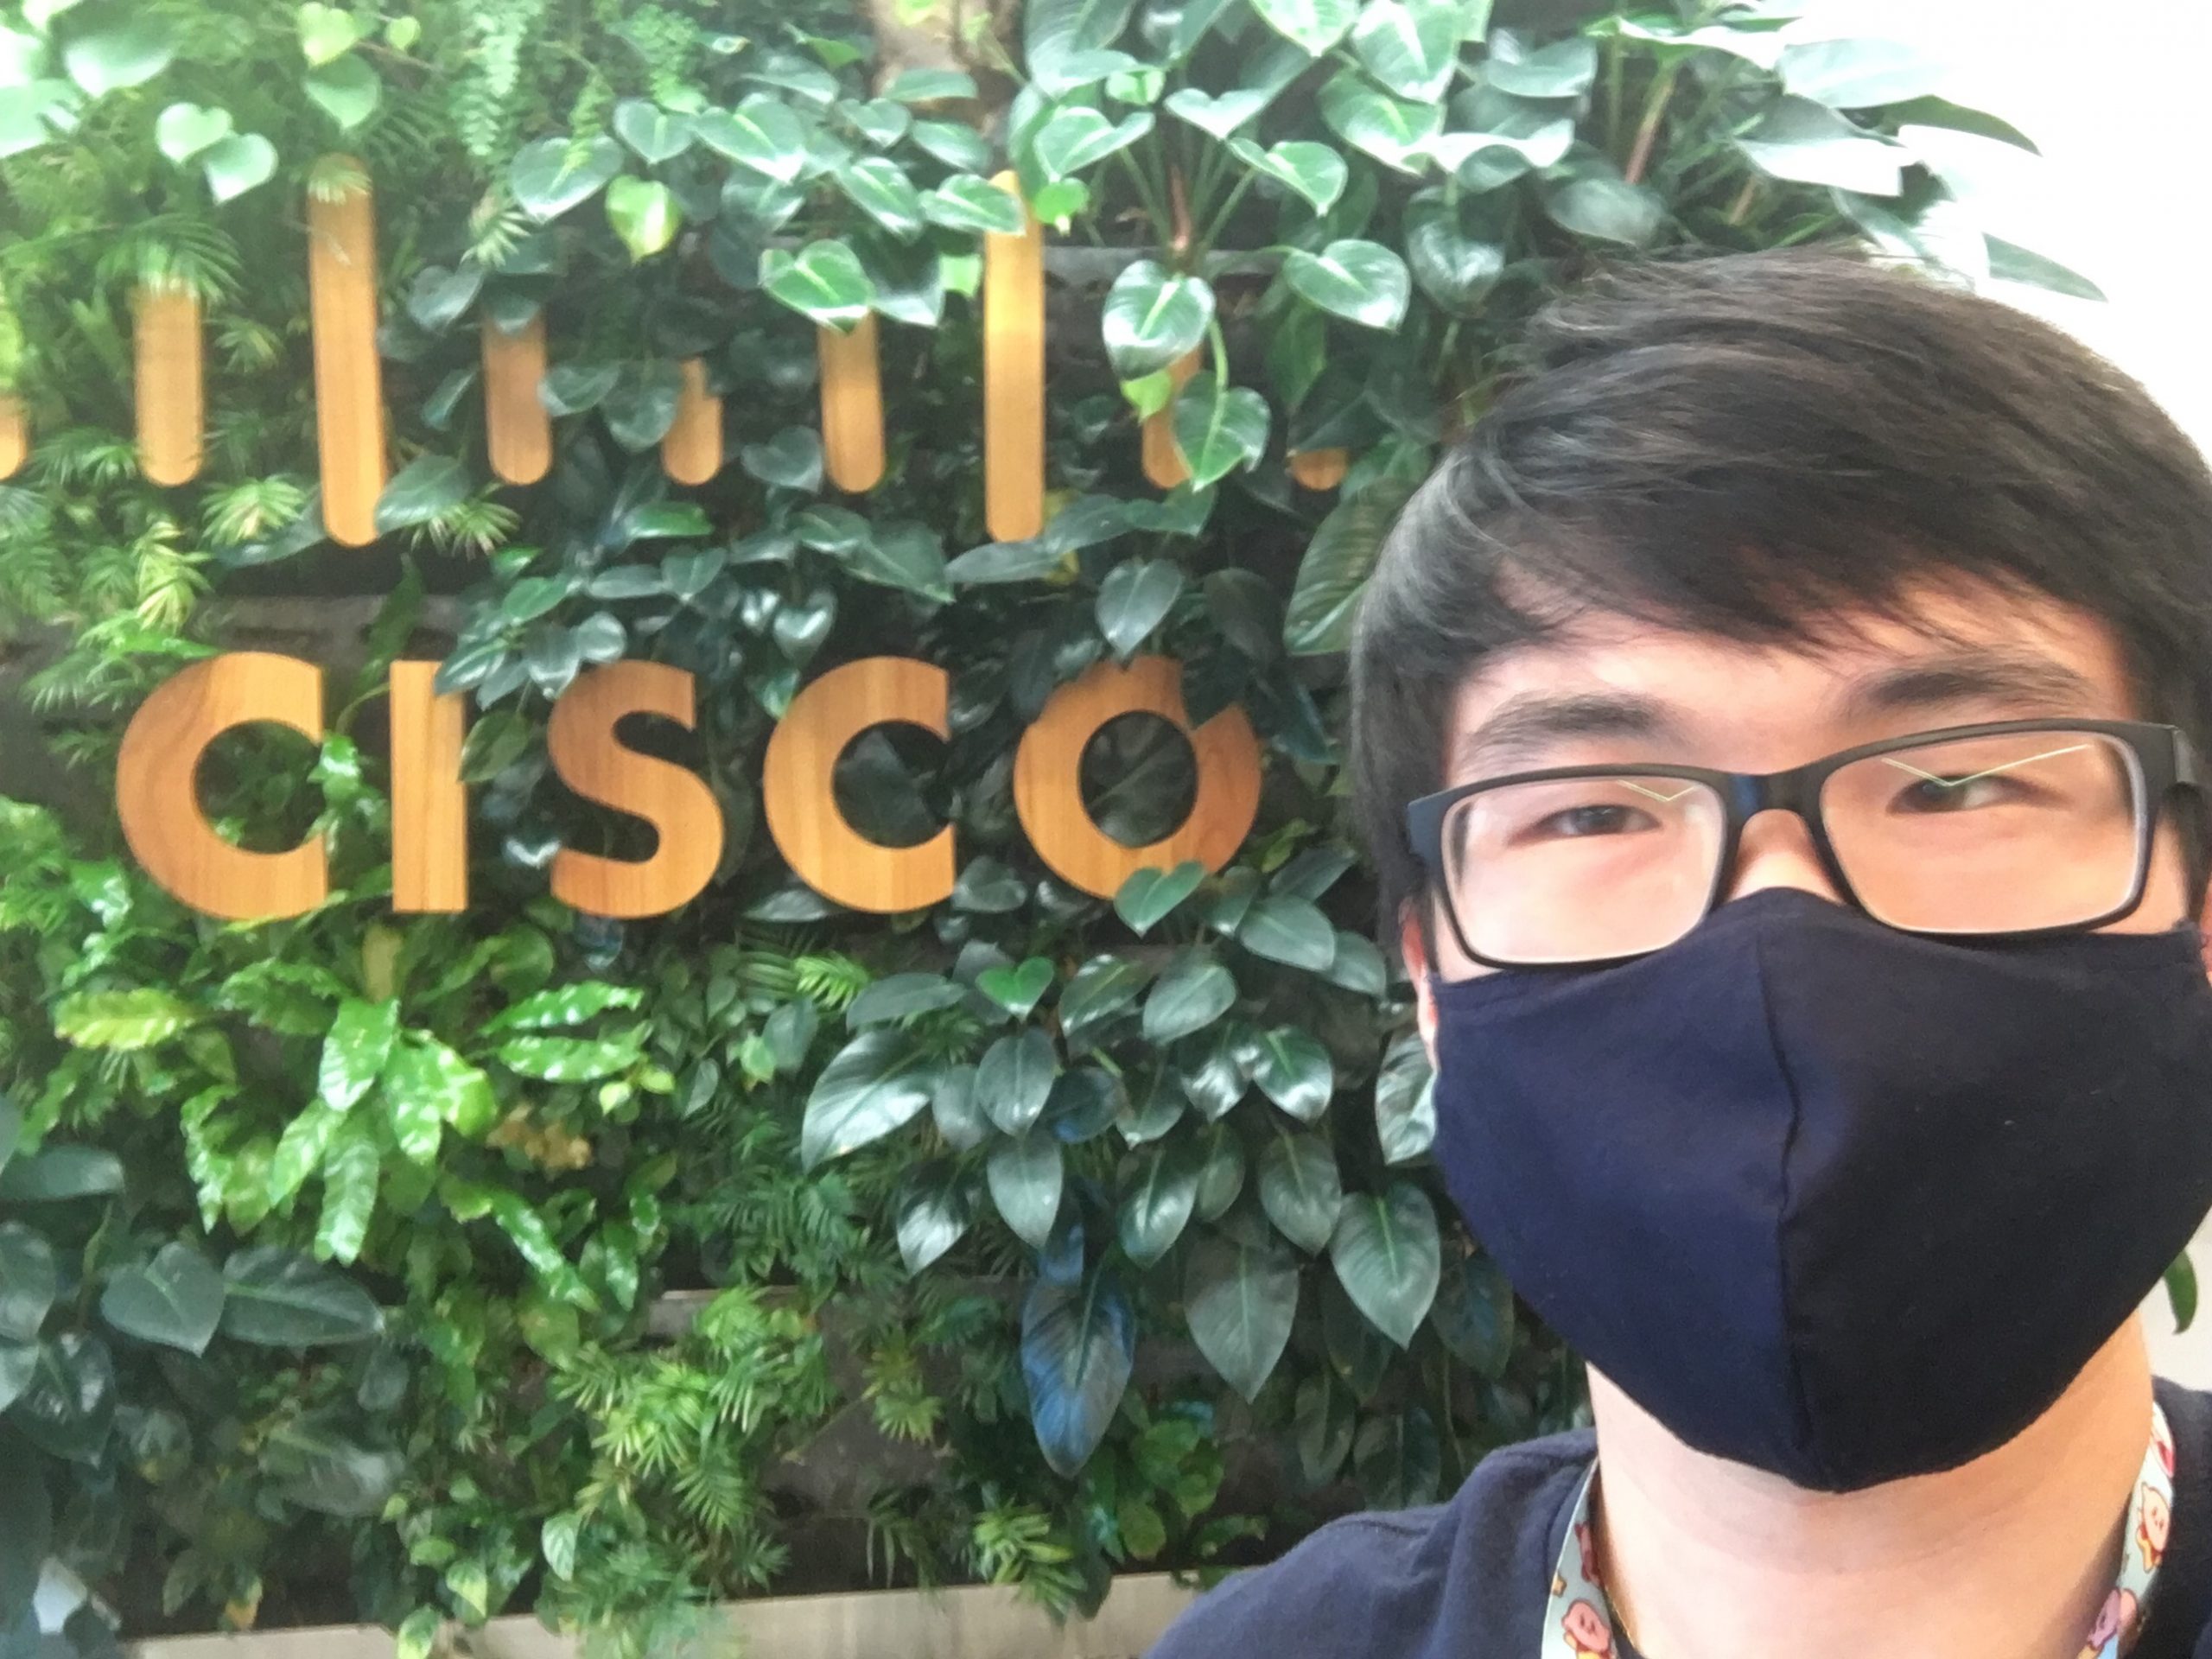 Bryce with mask in front of Cisco sign. 